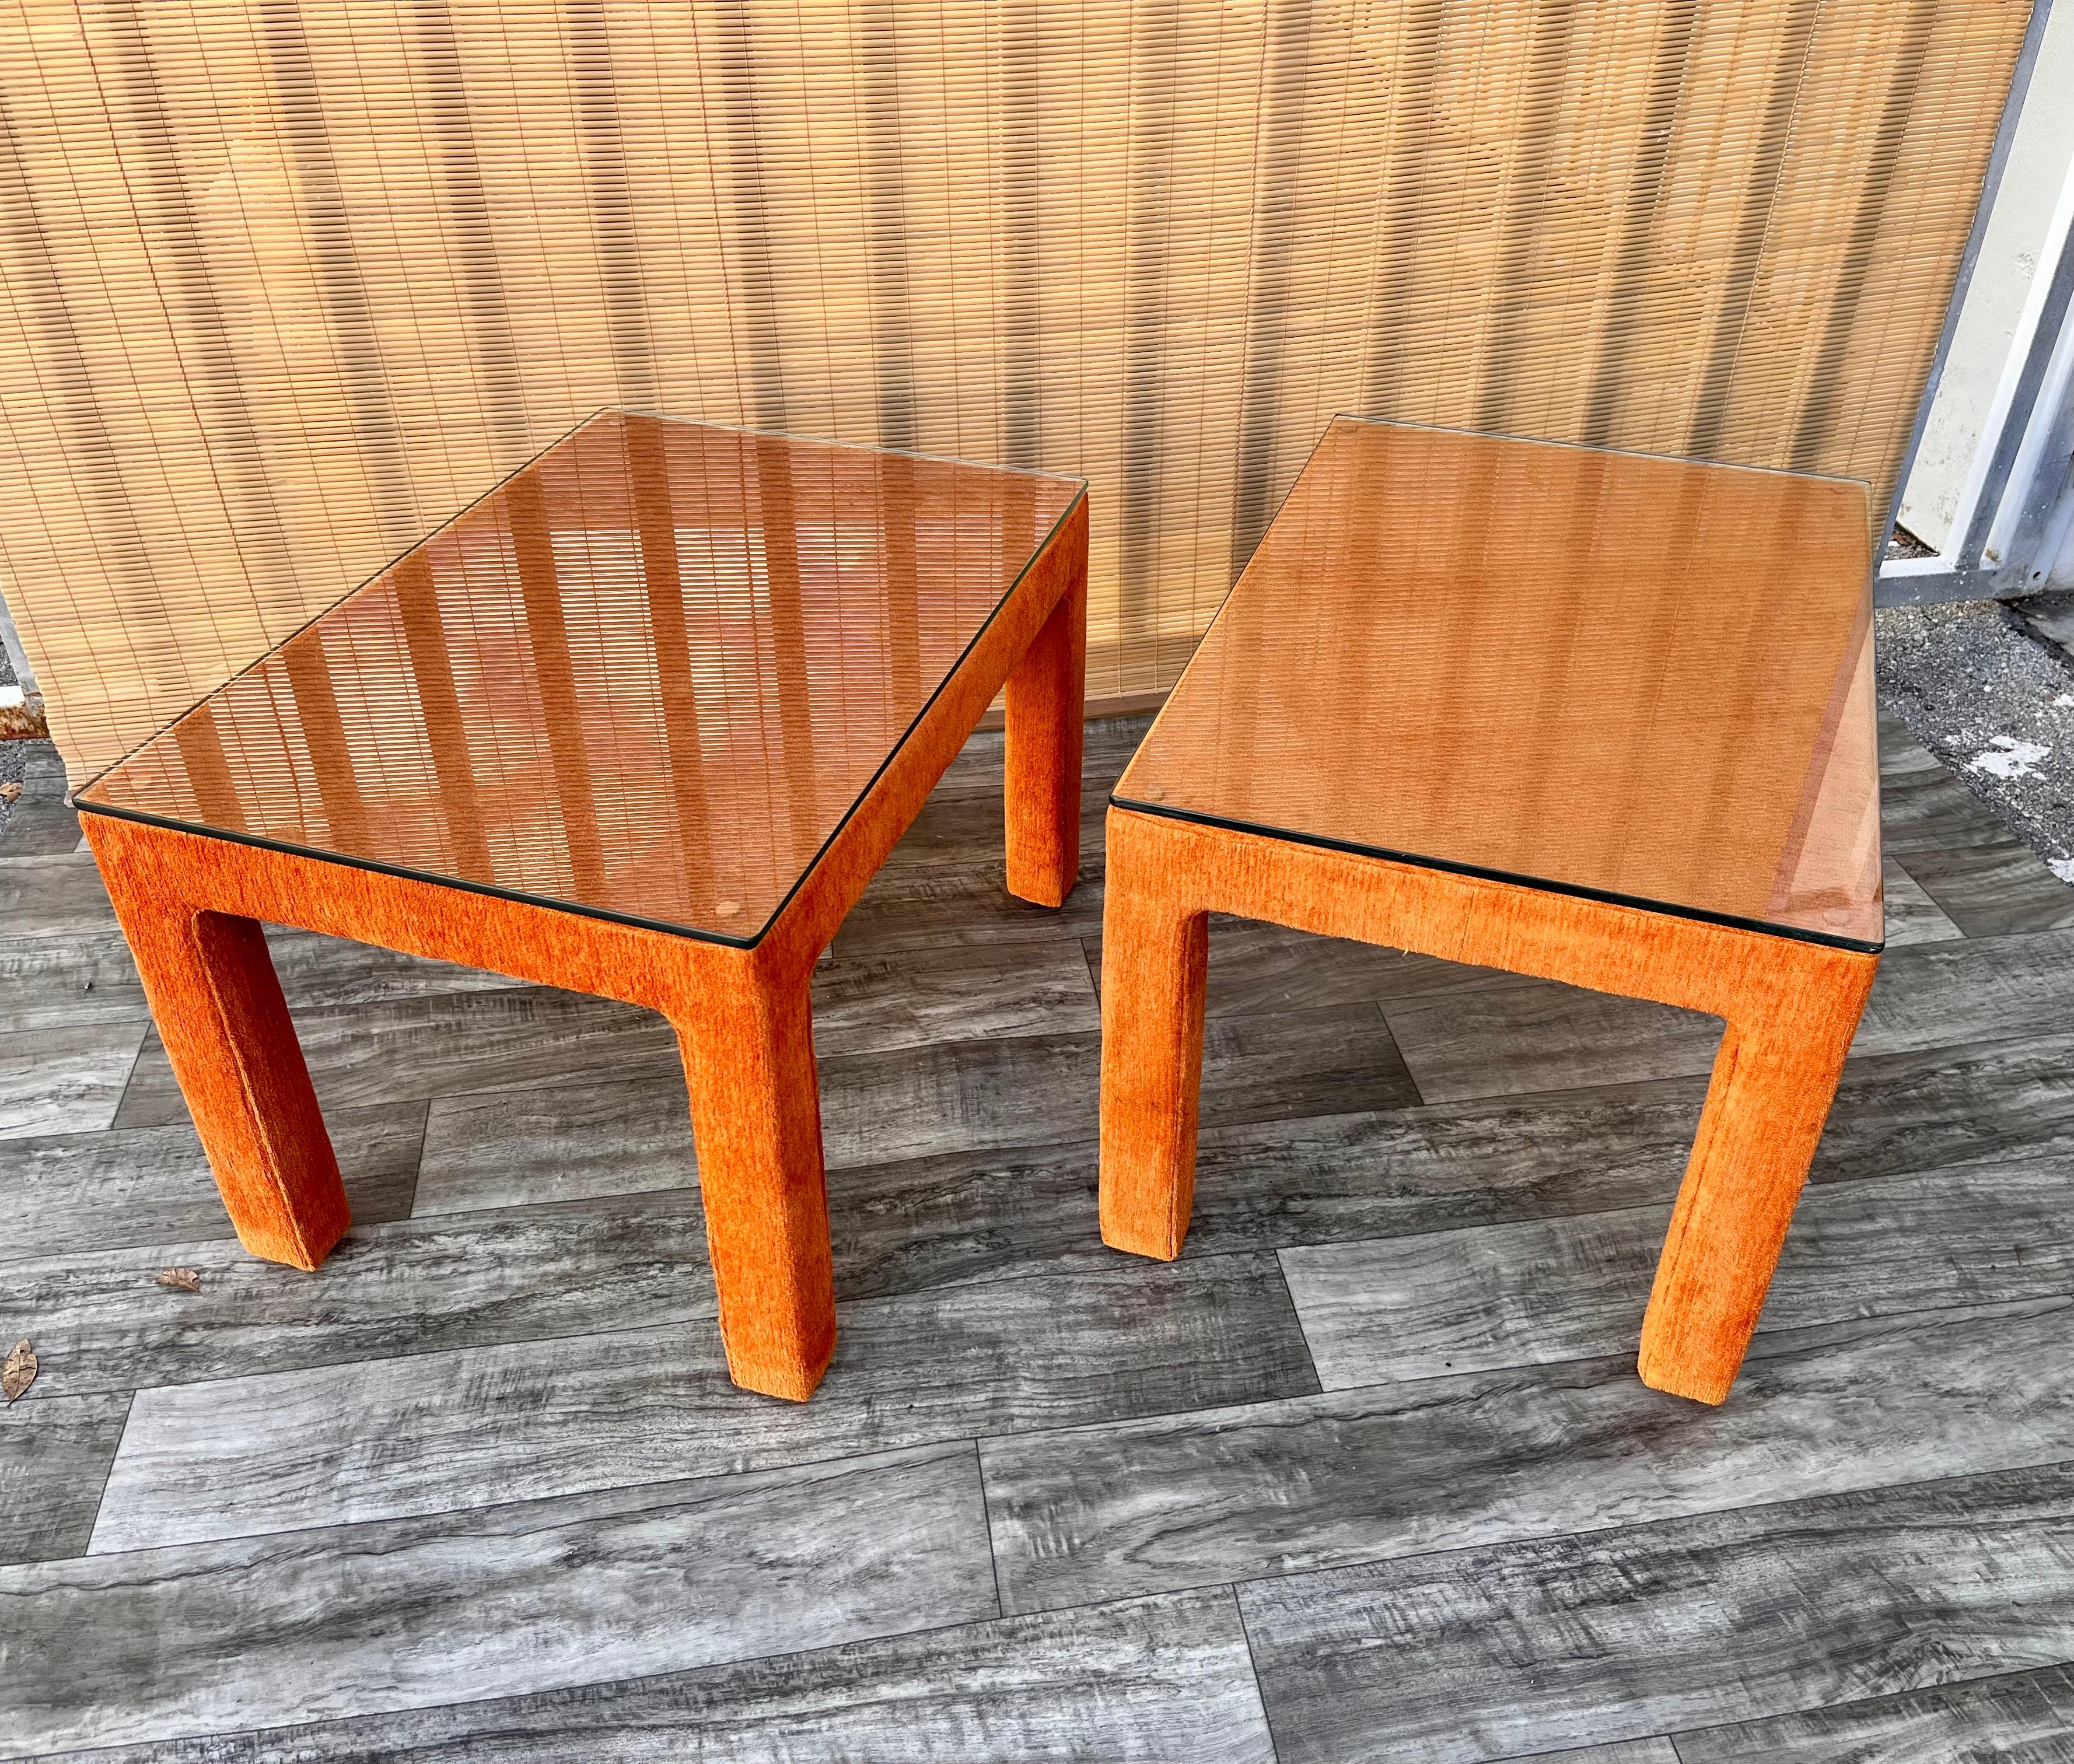 A Pair of Vintage Mid-Century Modern Fully Upholstered side tables in the Milo Baughman's Style. Circa 1970s.
Feature a fully upholstered wood frame in a burnt orange velvet with removable glass tops. 
In good original condition with signs of wear